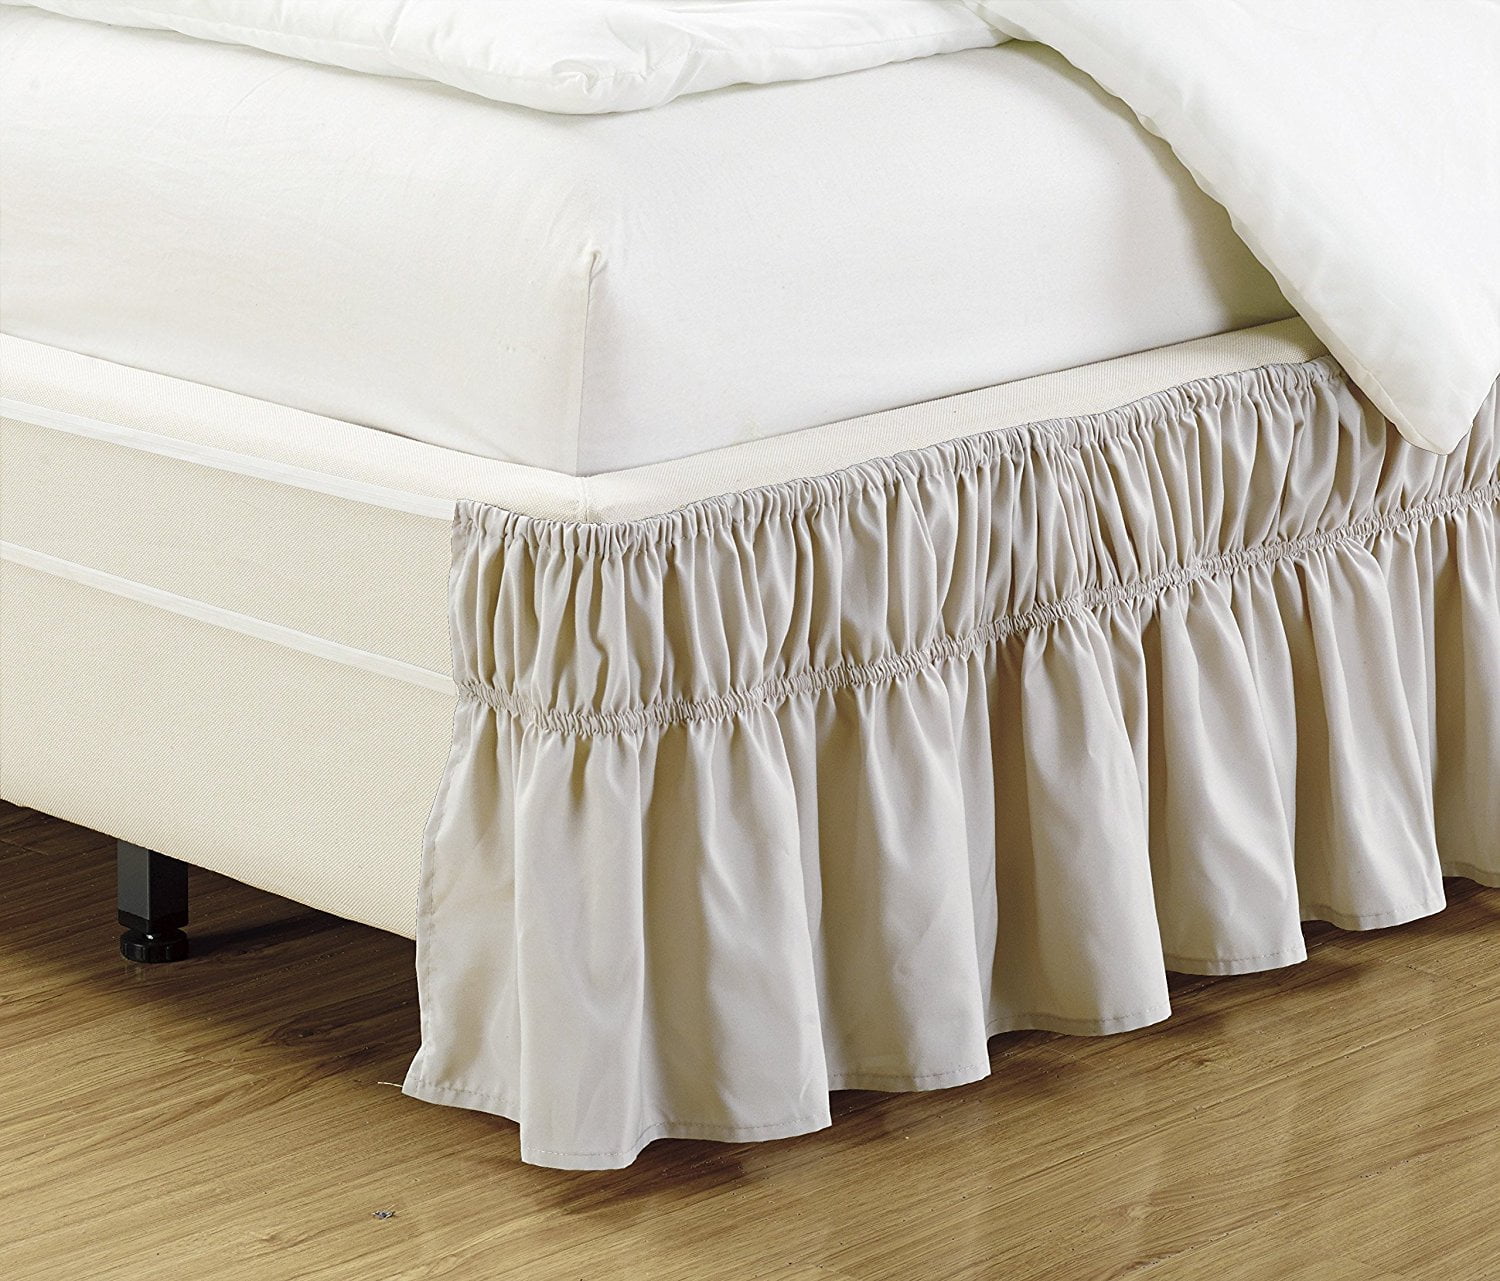 New Elastic Bed Ruffle Skirt W/ Drop Wrap Around Soft Twin Full Queen King 